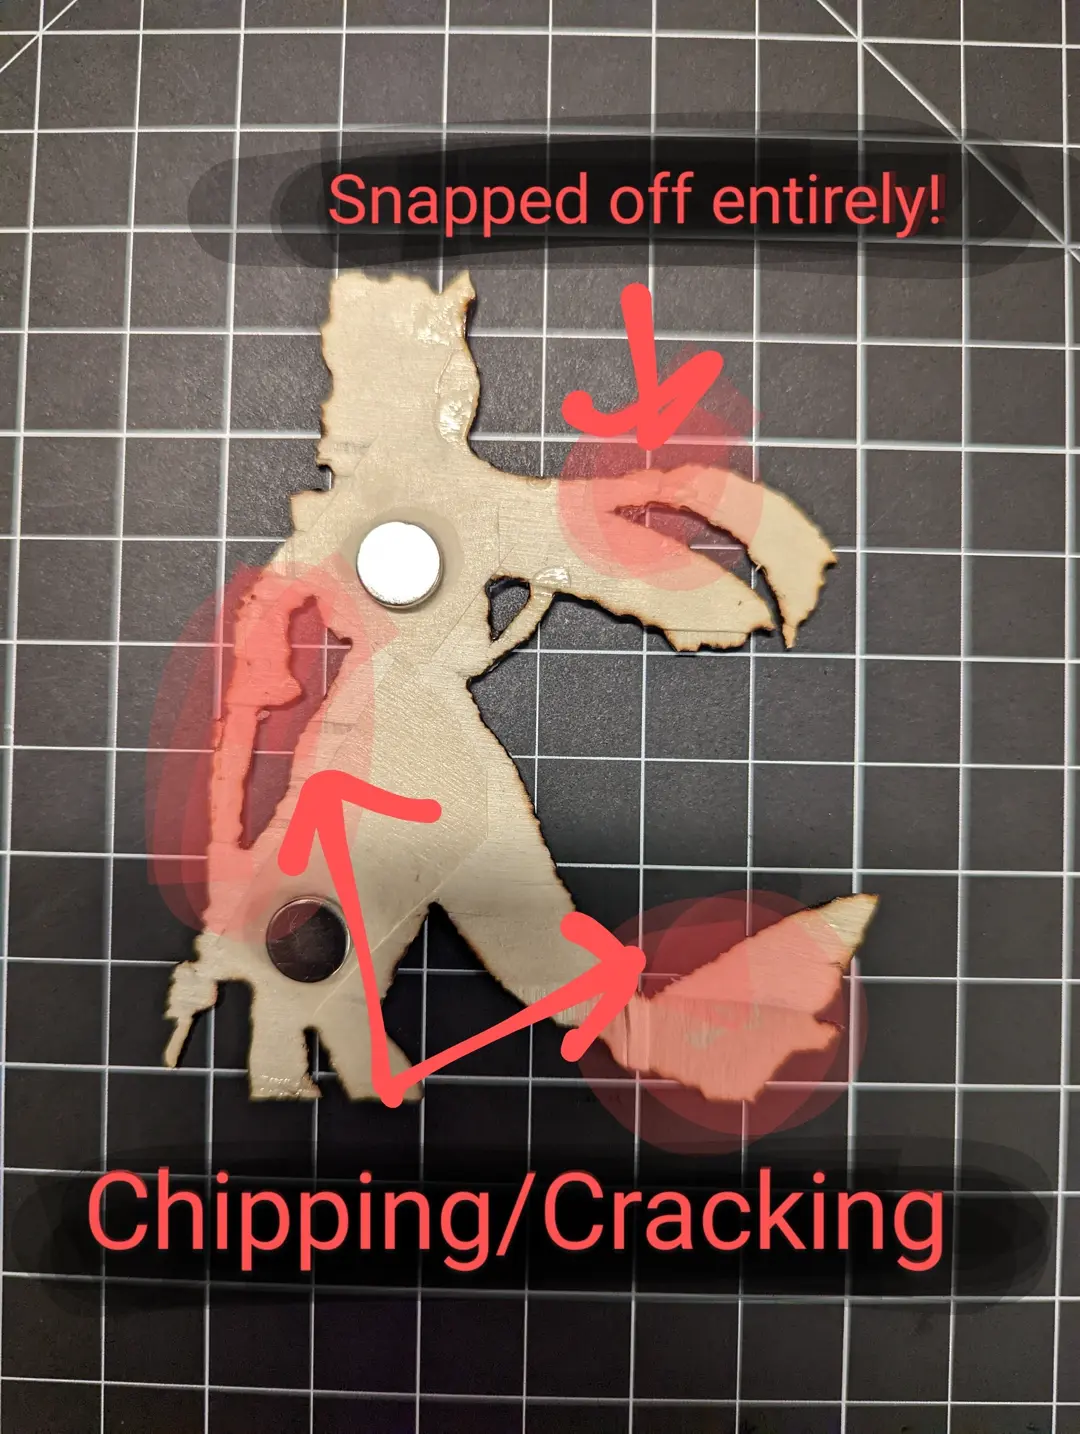 Image showing faults with cutting out the art including cracking and chipping.